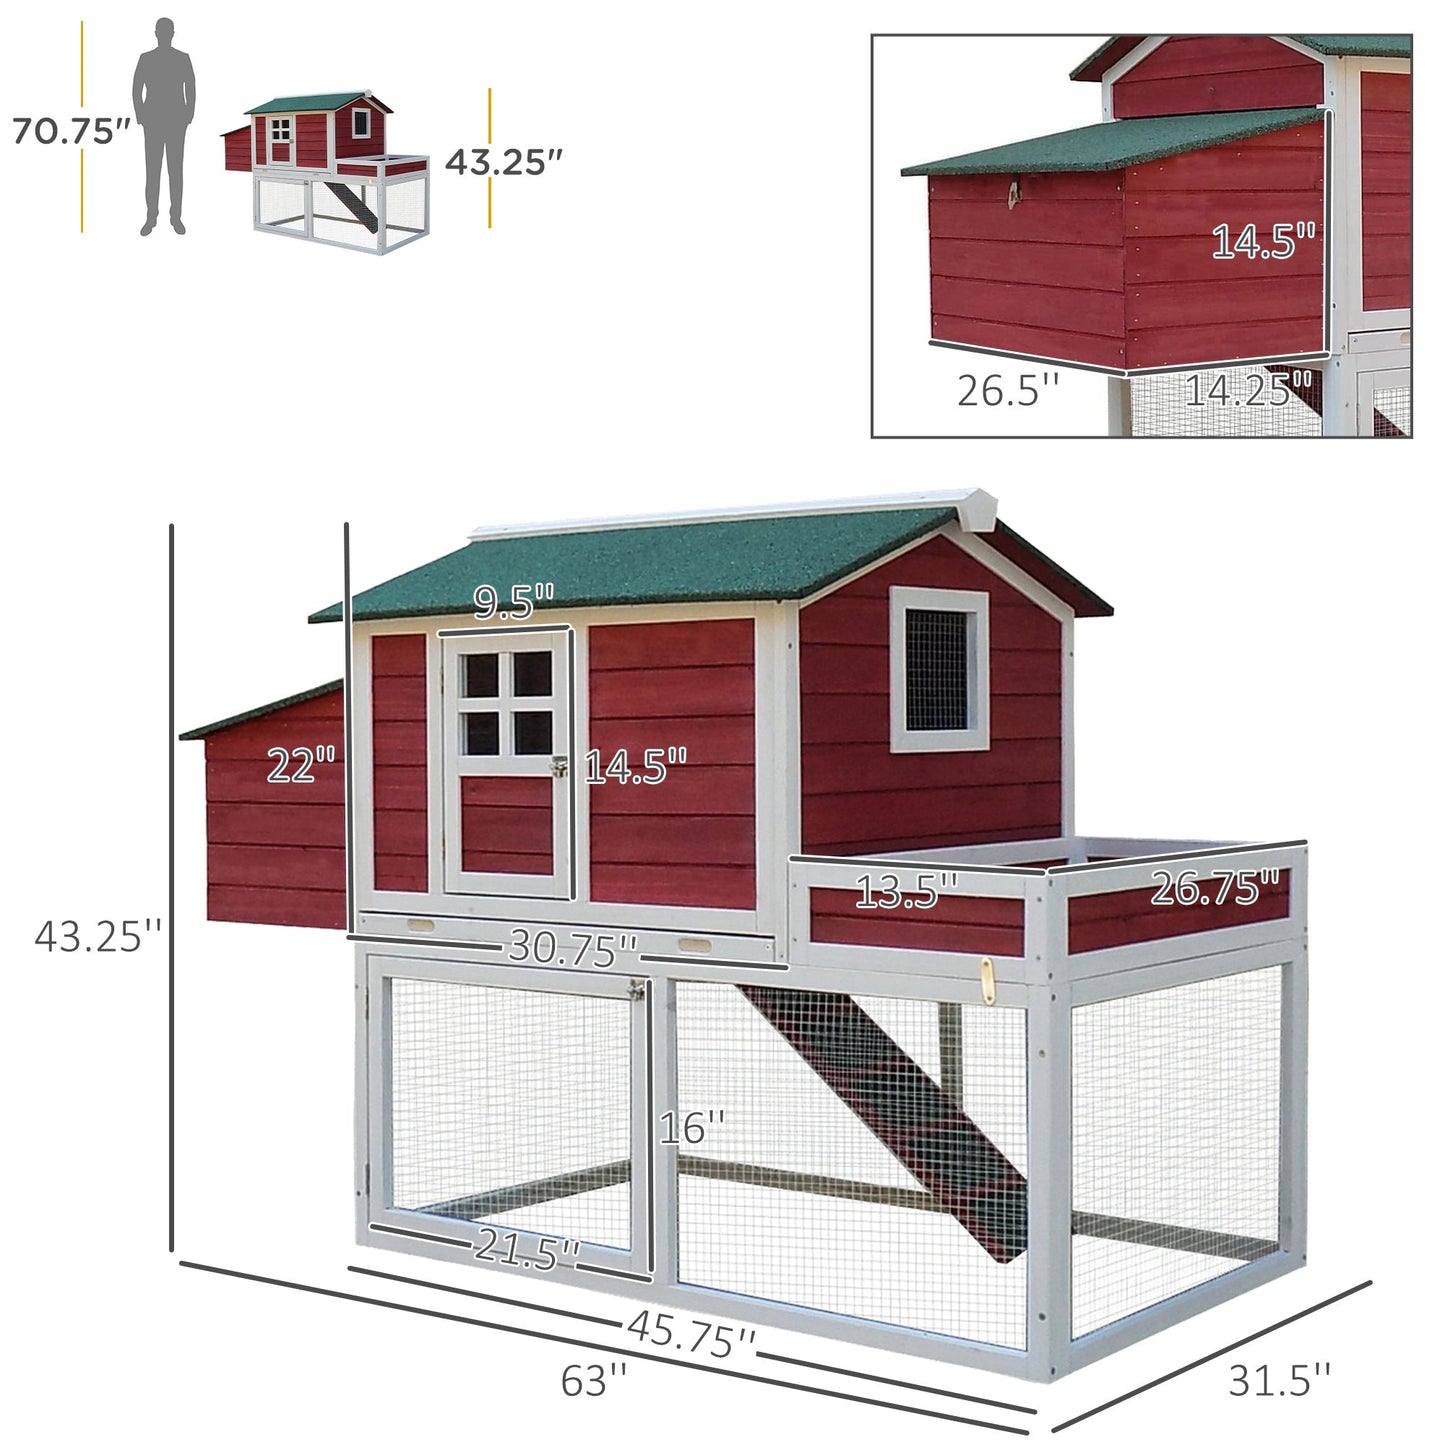 Outdoor and Garden-63" Wooden Chicken Coop Hen House Poultry Cage for Outdoor Backyard with Raised Garden Bed, Run Area, Nesting Box and Removable Tray, Red - Outdoor Style Company